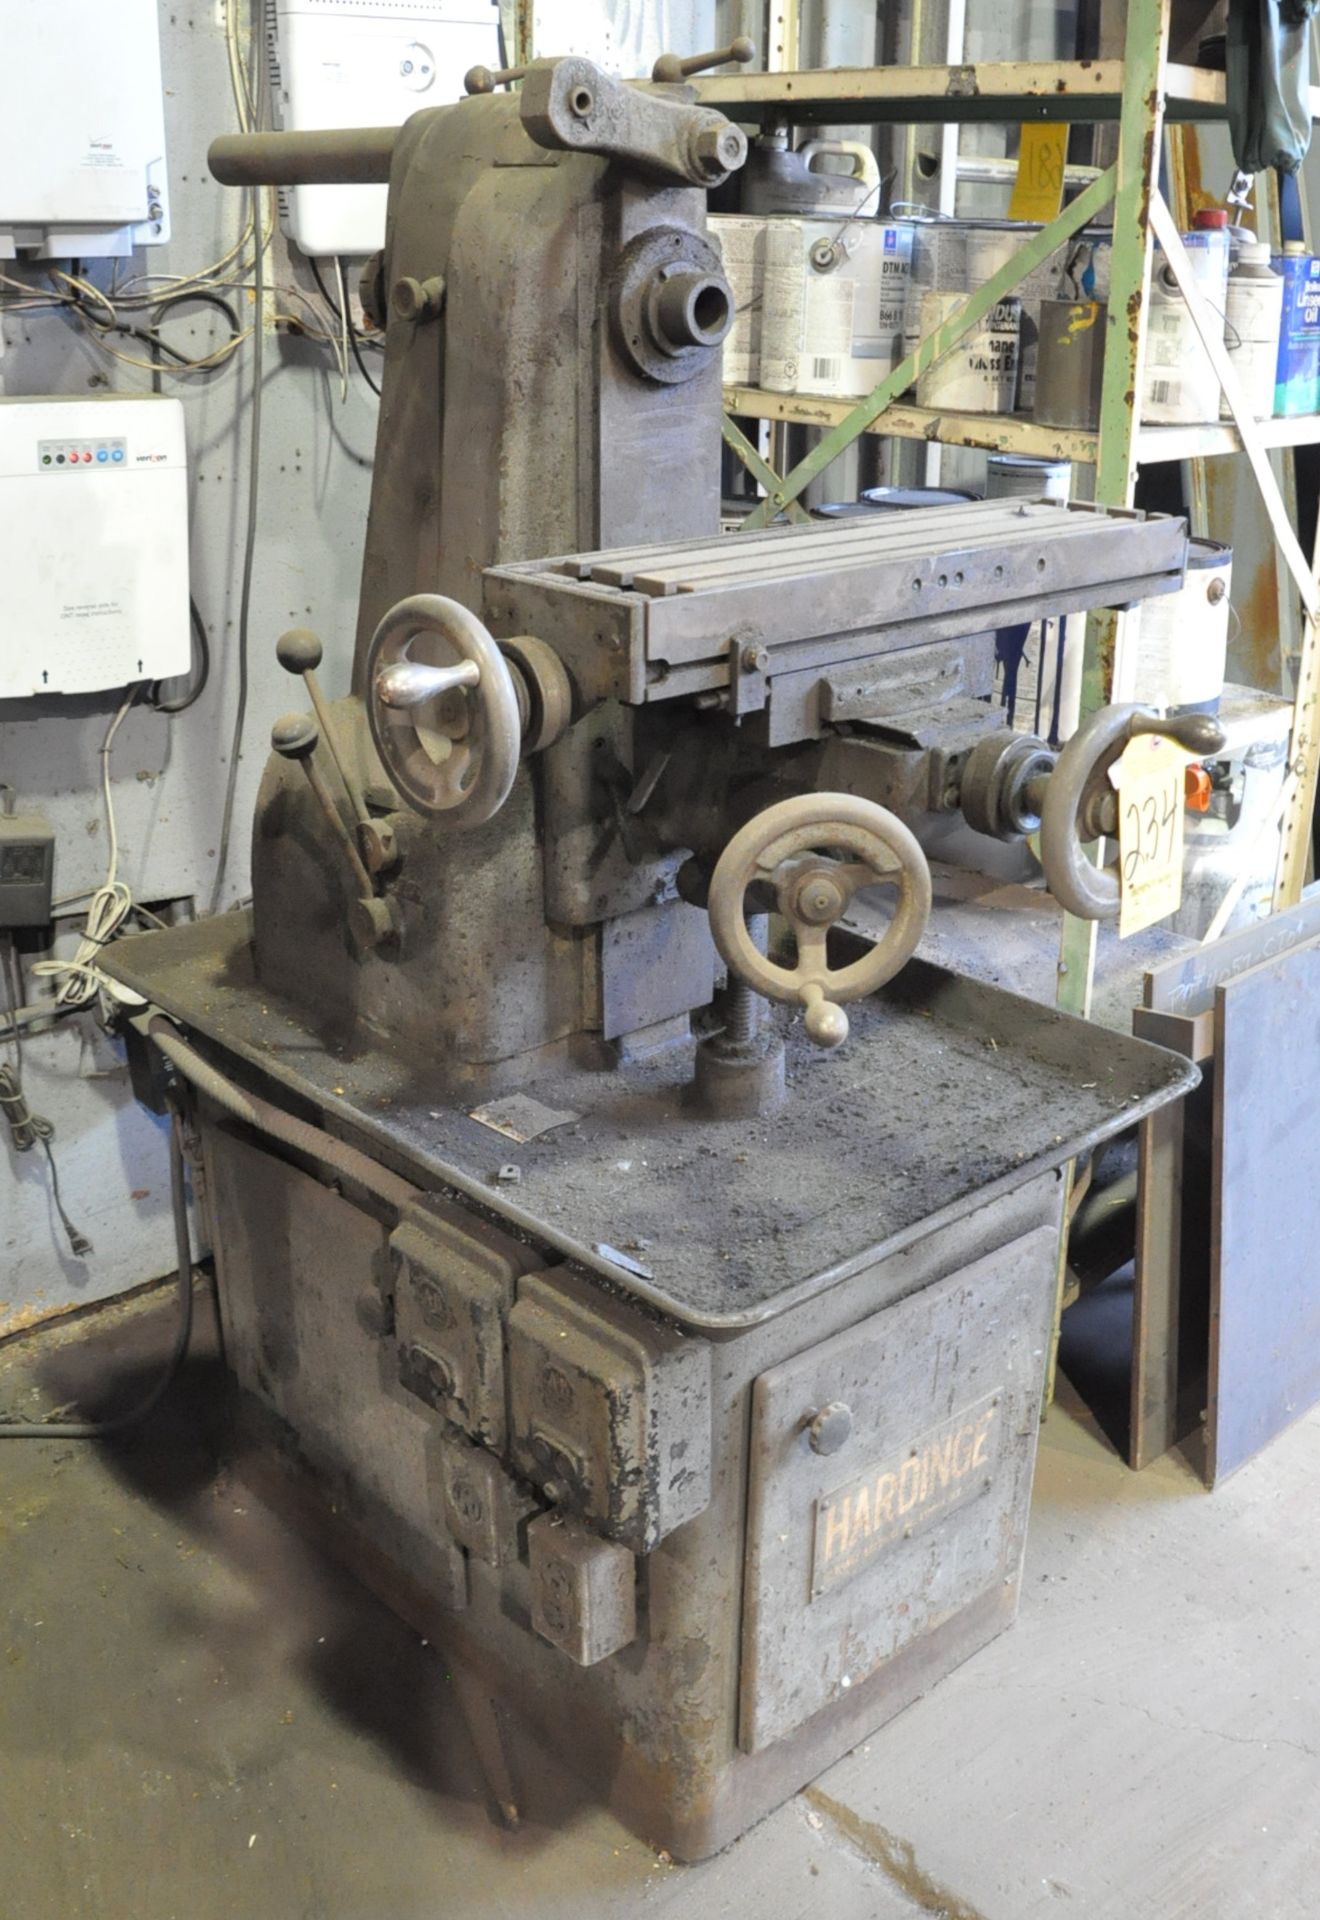 Hardinge Horizontal Milling Machine, S/n N/a, 6 1/2" x 25 1/2" T-Slotted Table - Image 2 of 3